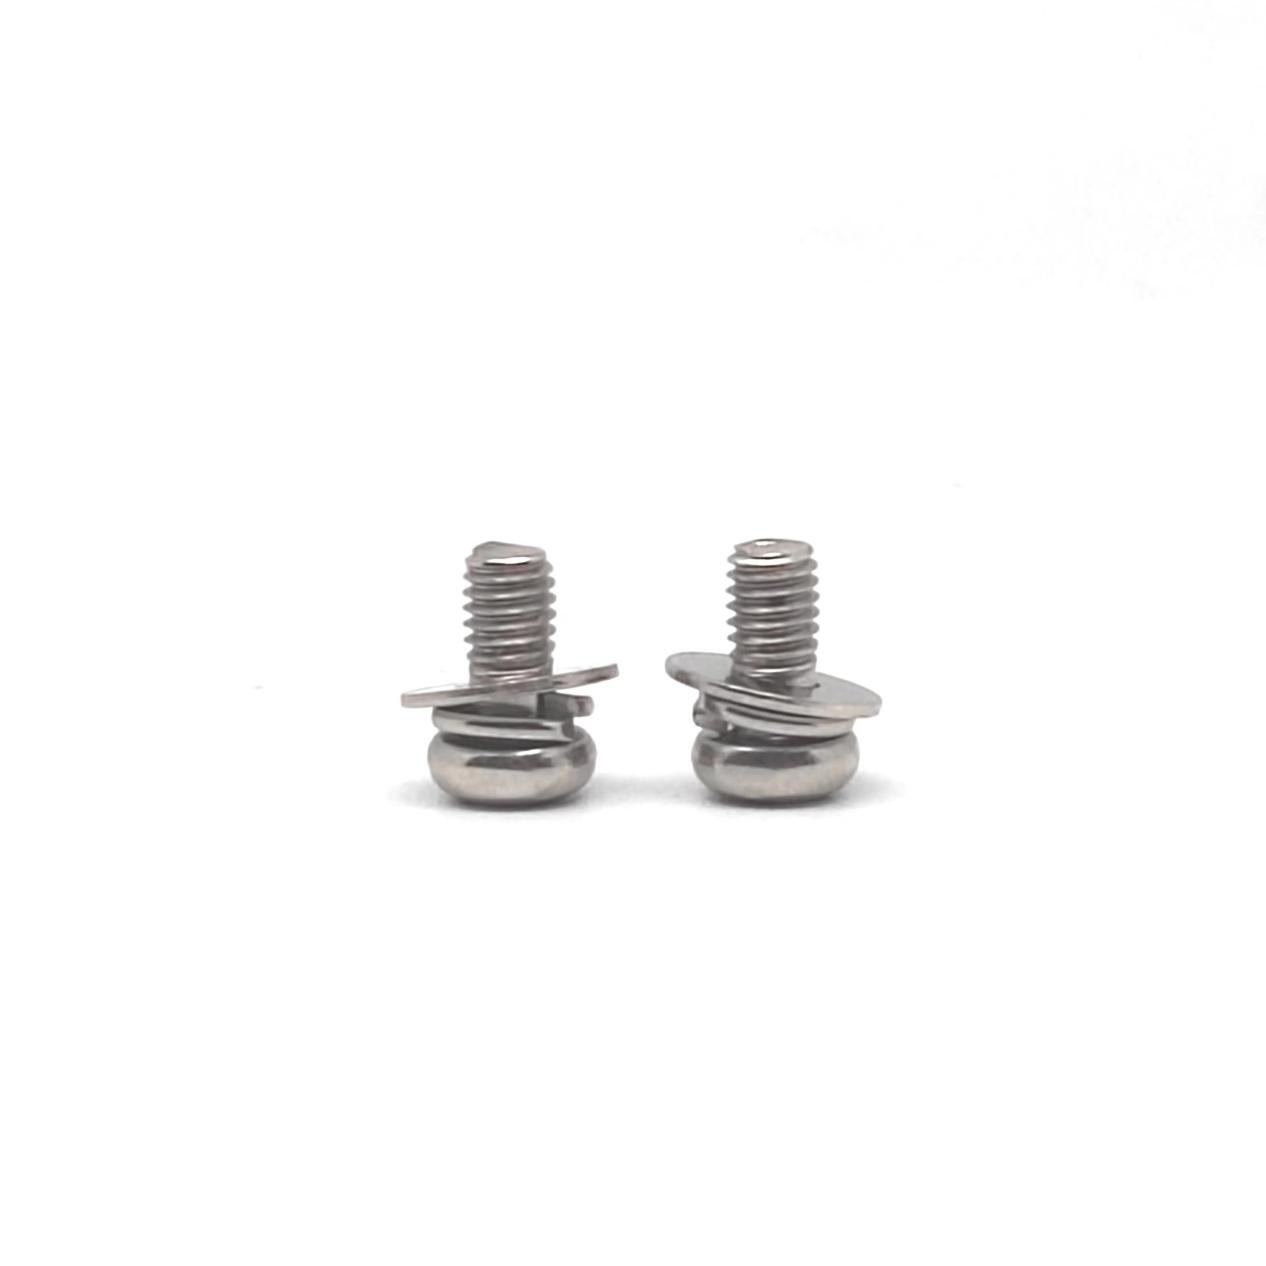 Pan Head Screws with Double Washer